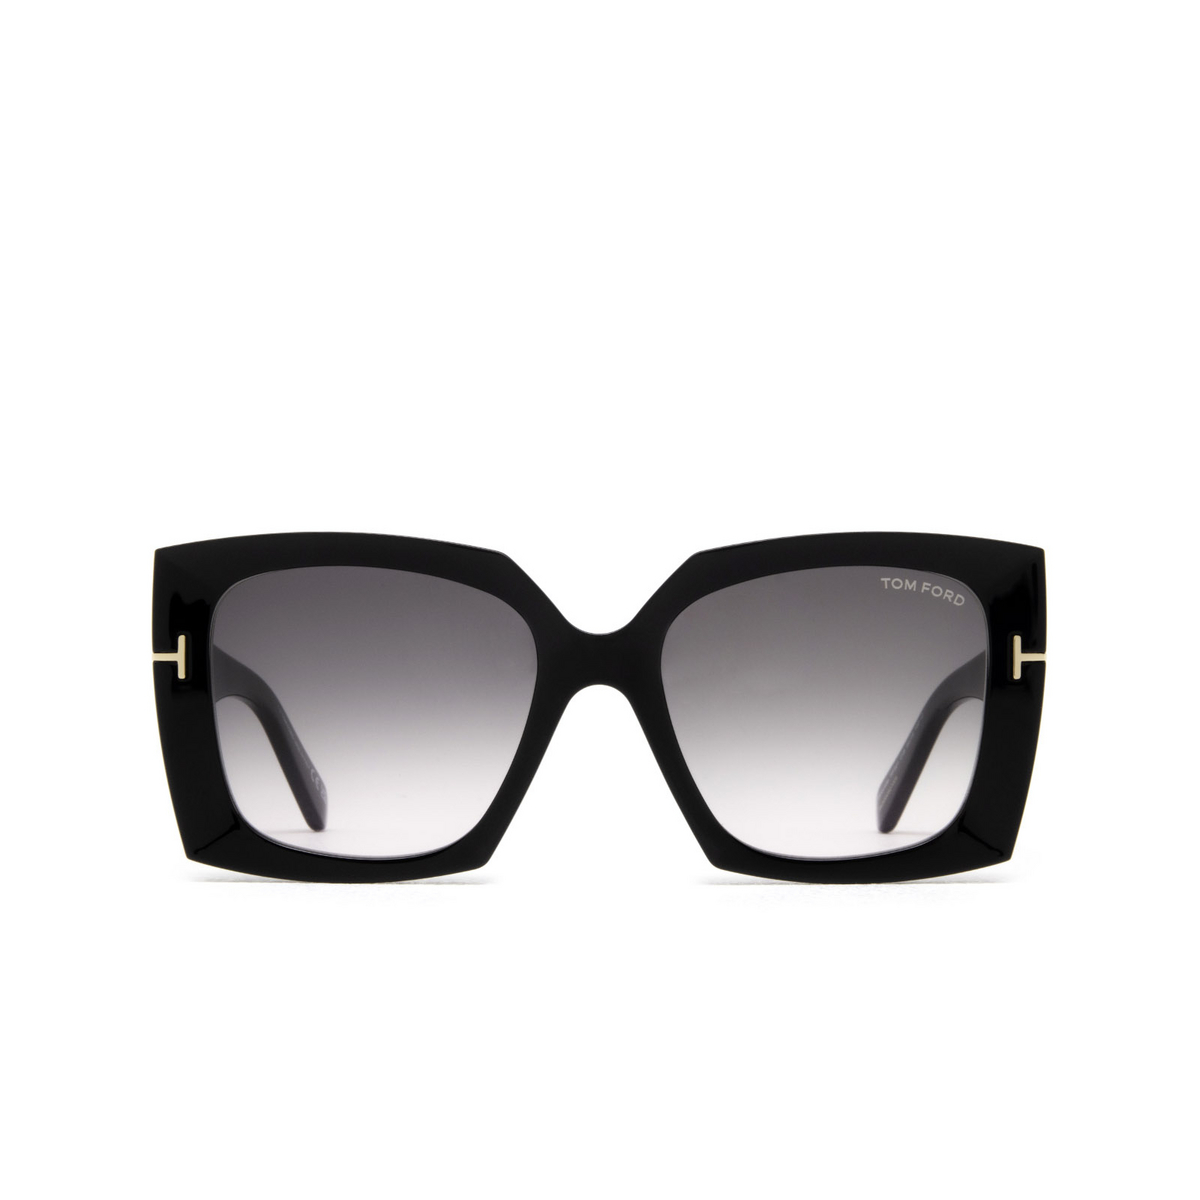 Tom Ford® Square Sunglasses: Jacquetta FT0921 color Black 01B - front view.